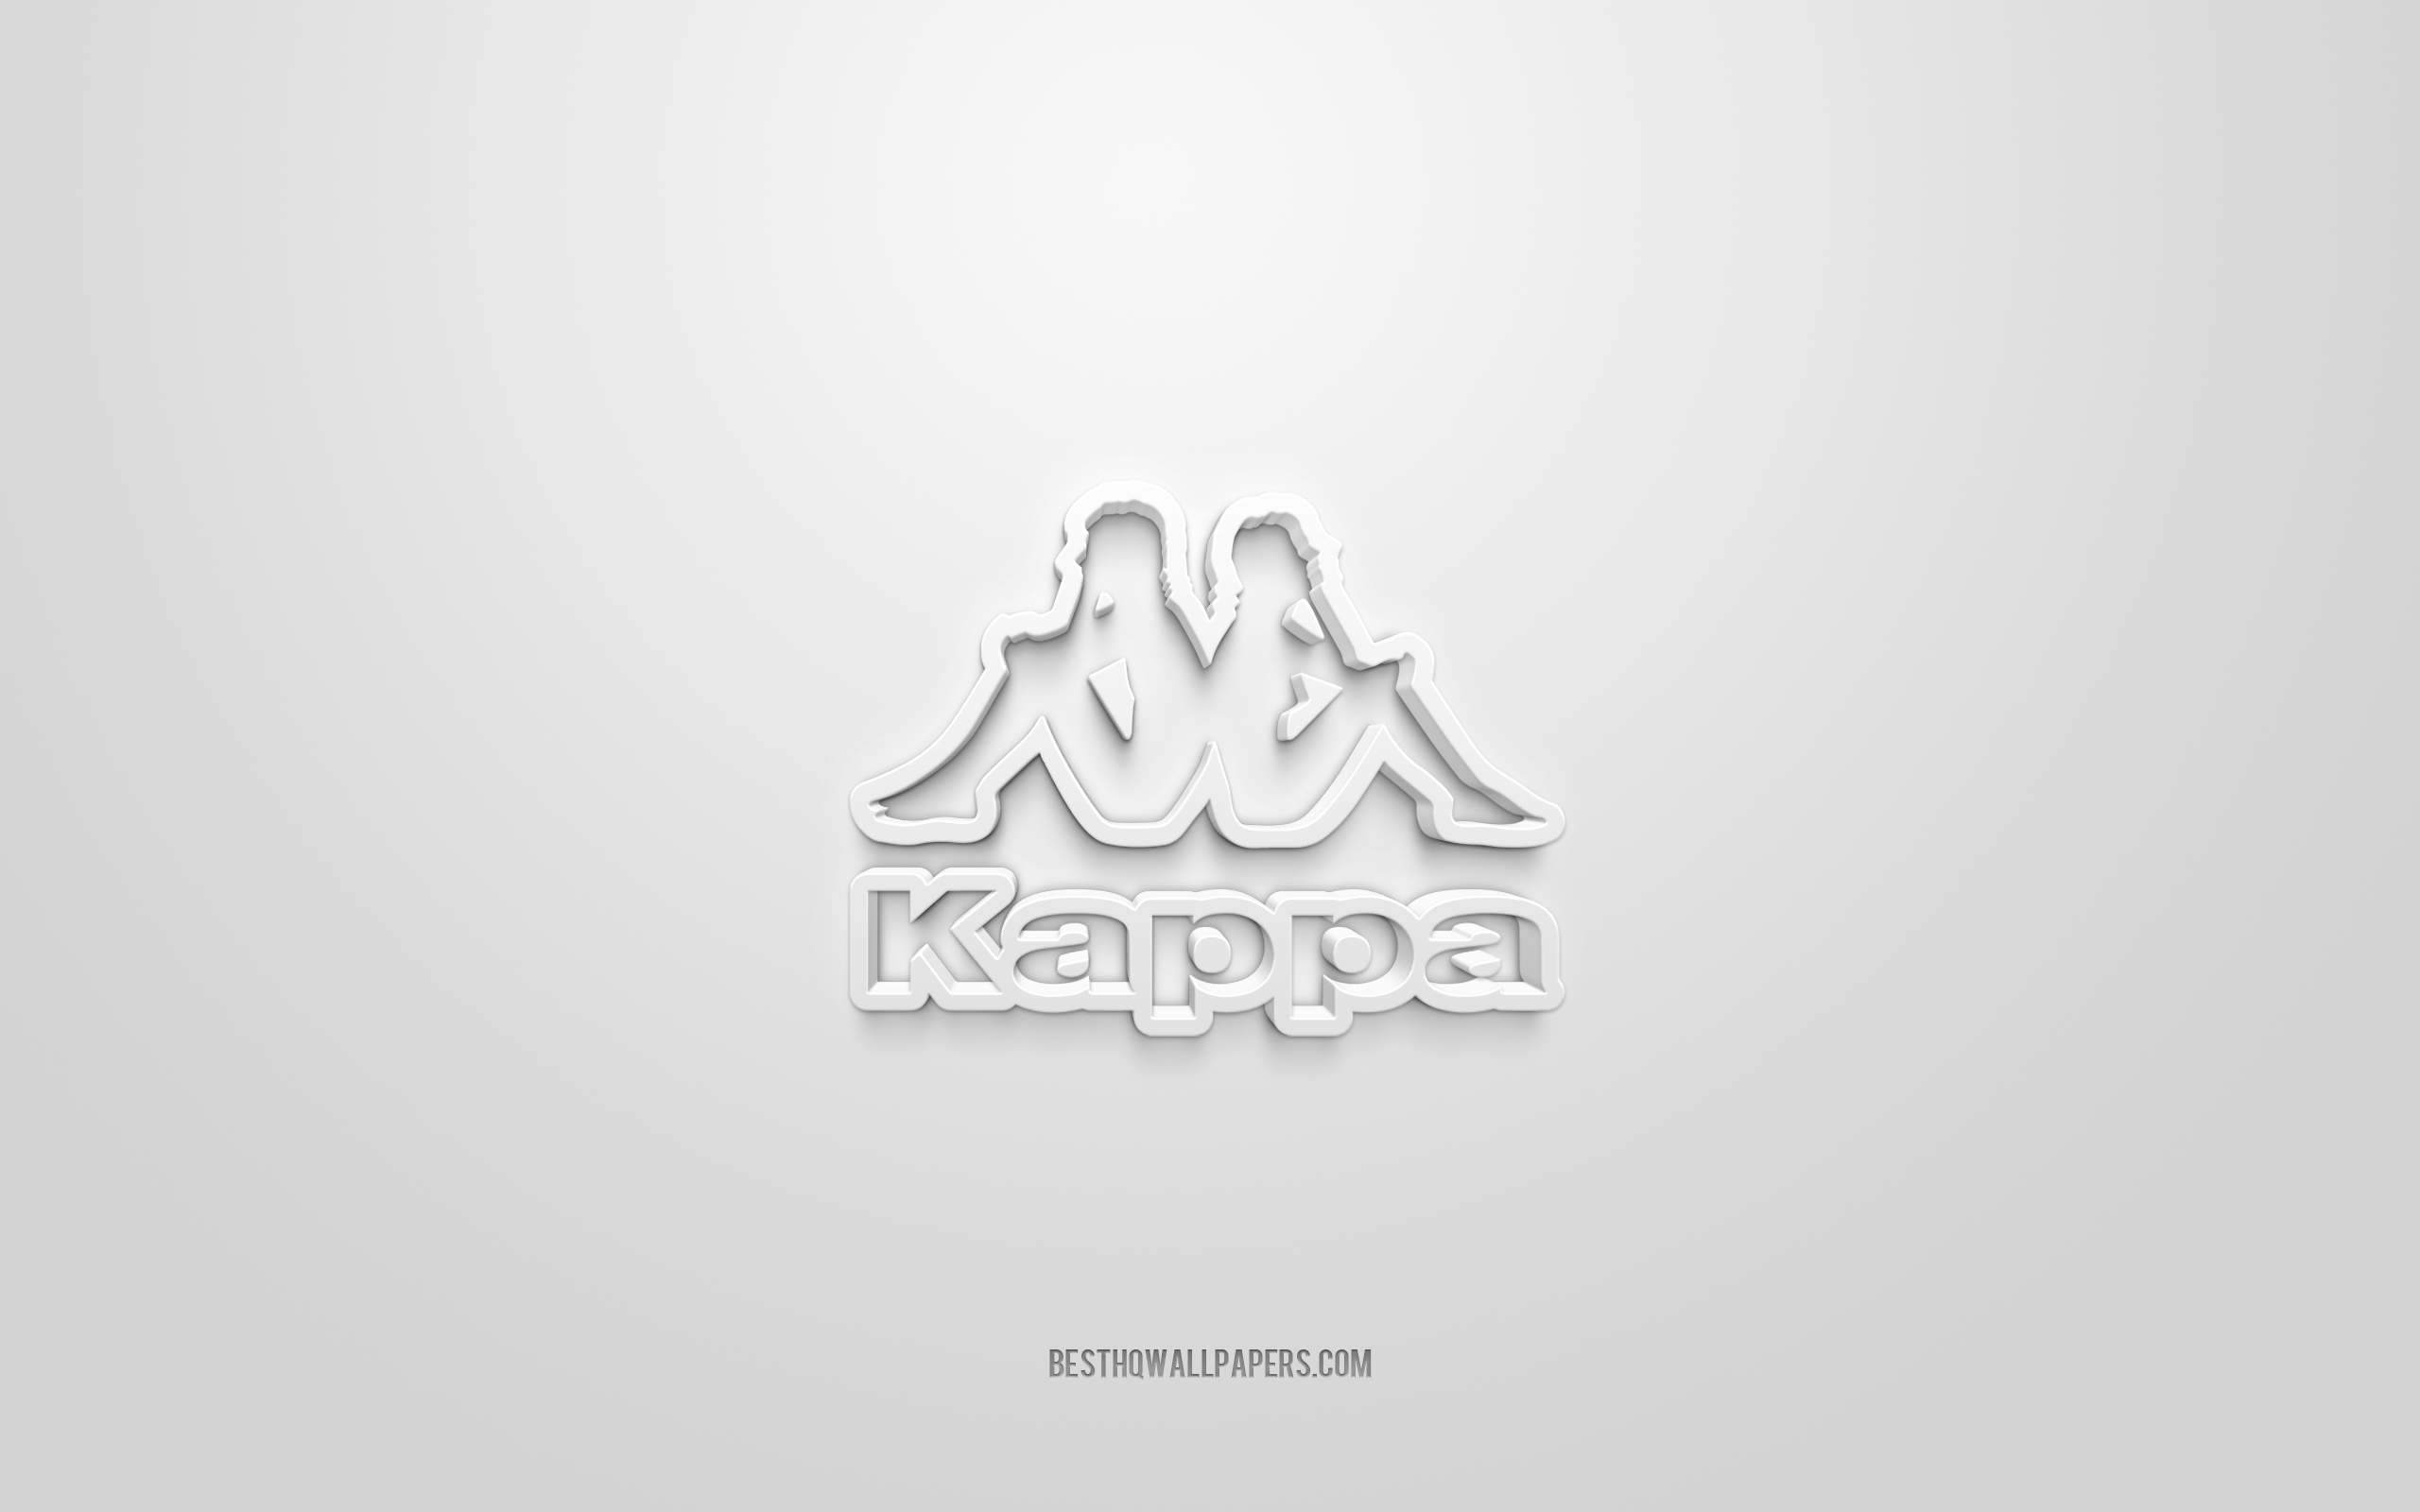 Kappa Alpha Psi Zoom Background Template  PosterMyWall